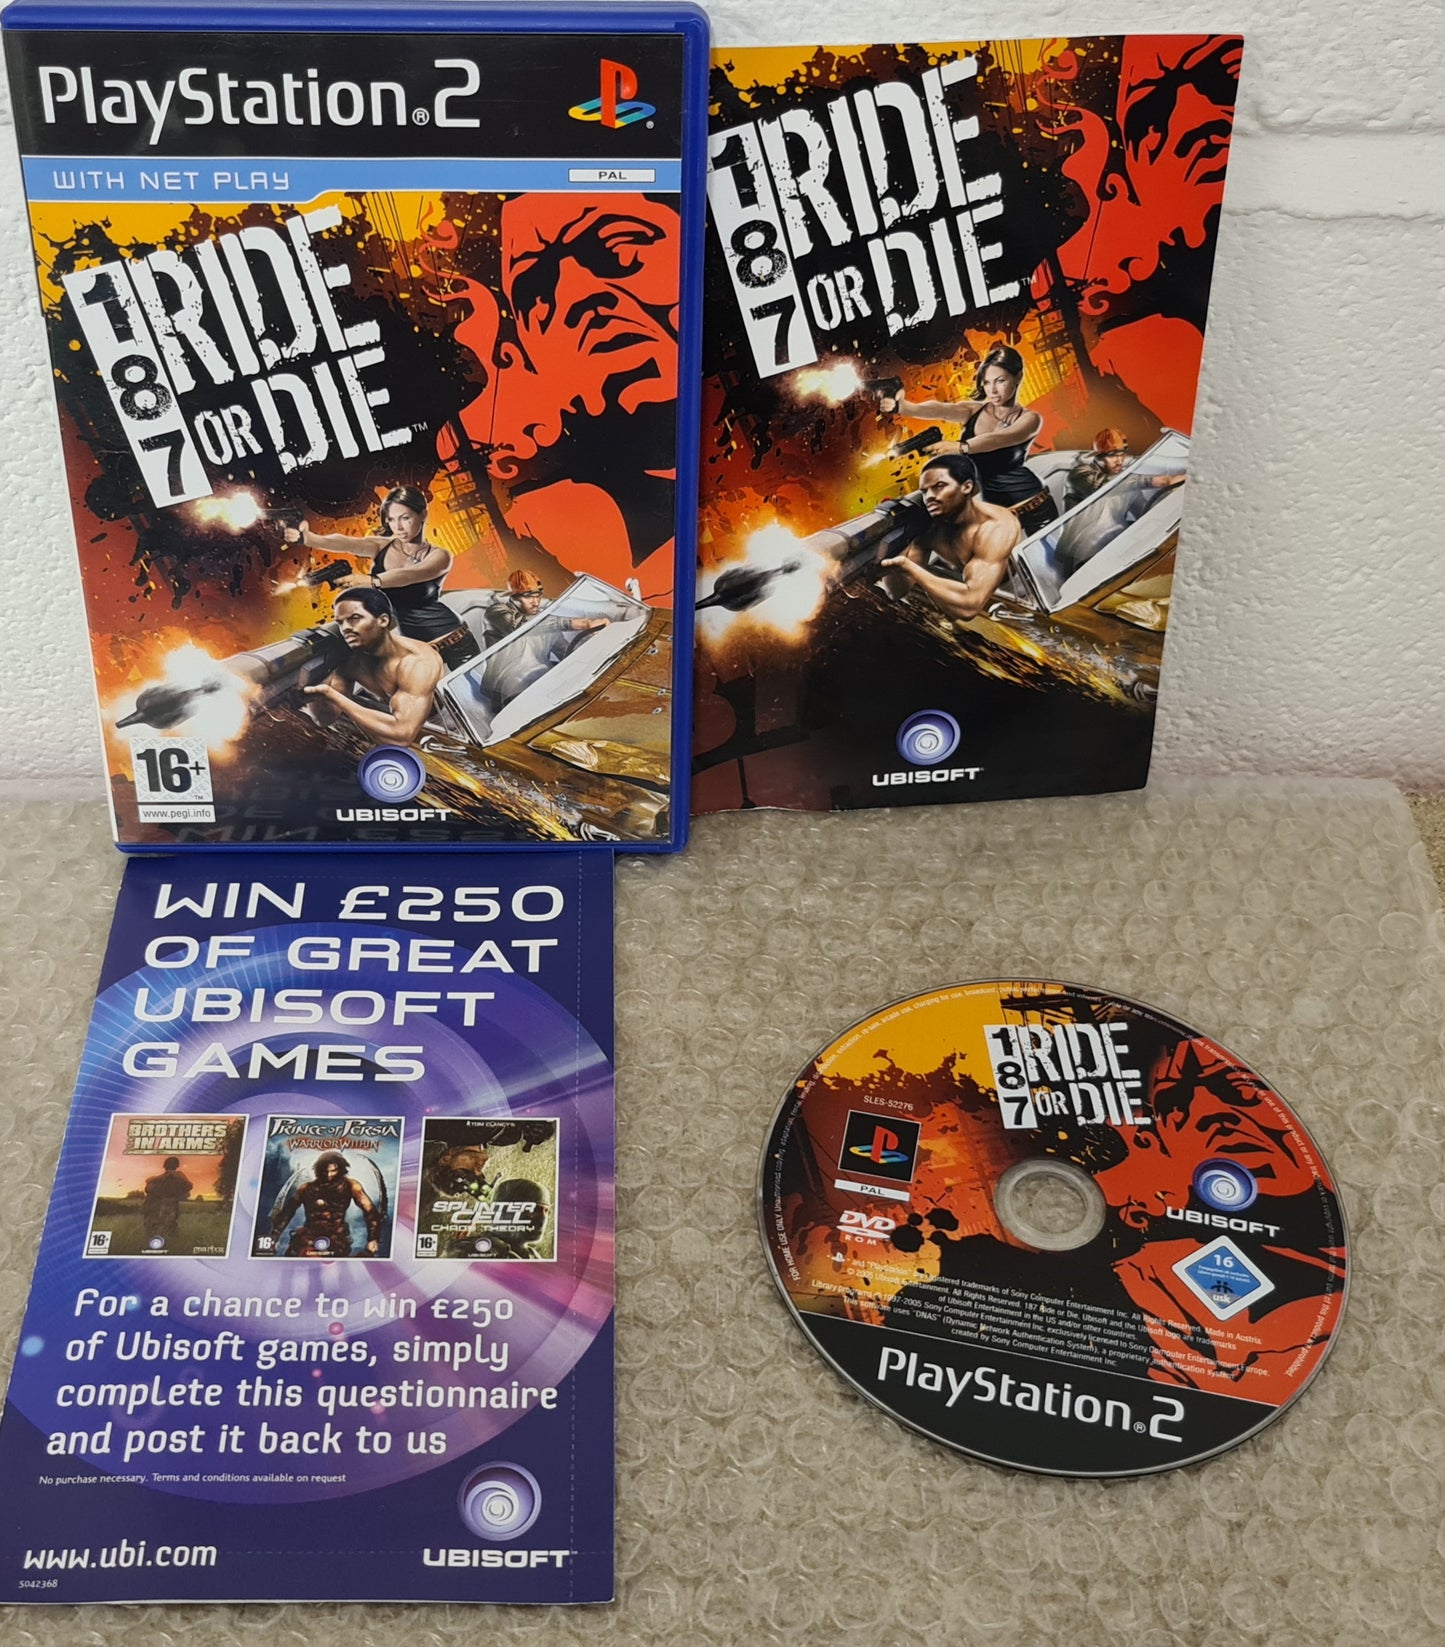 187 Ride or Die Sony Playstation 2 (PS2) Game